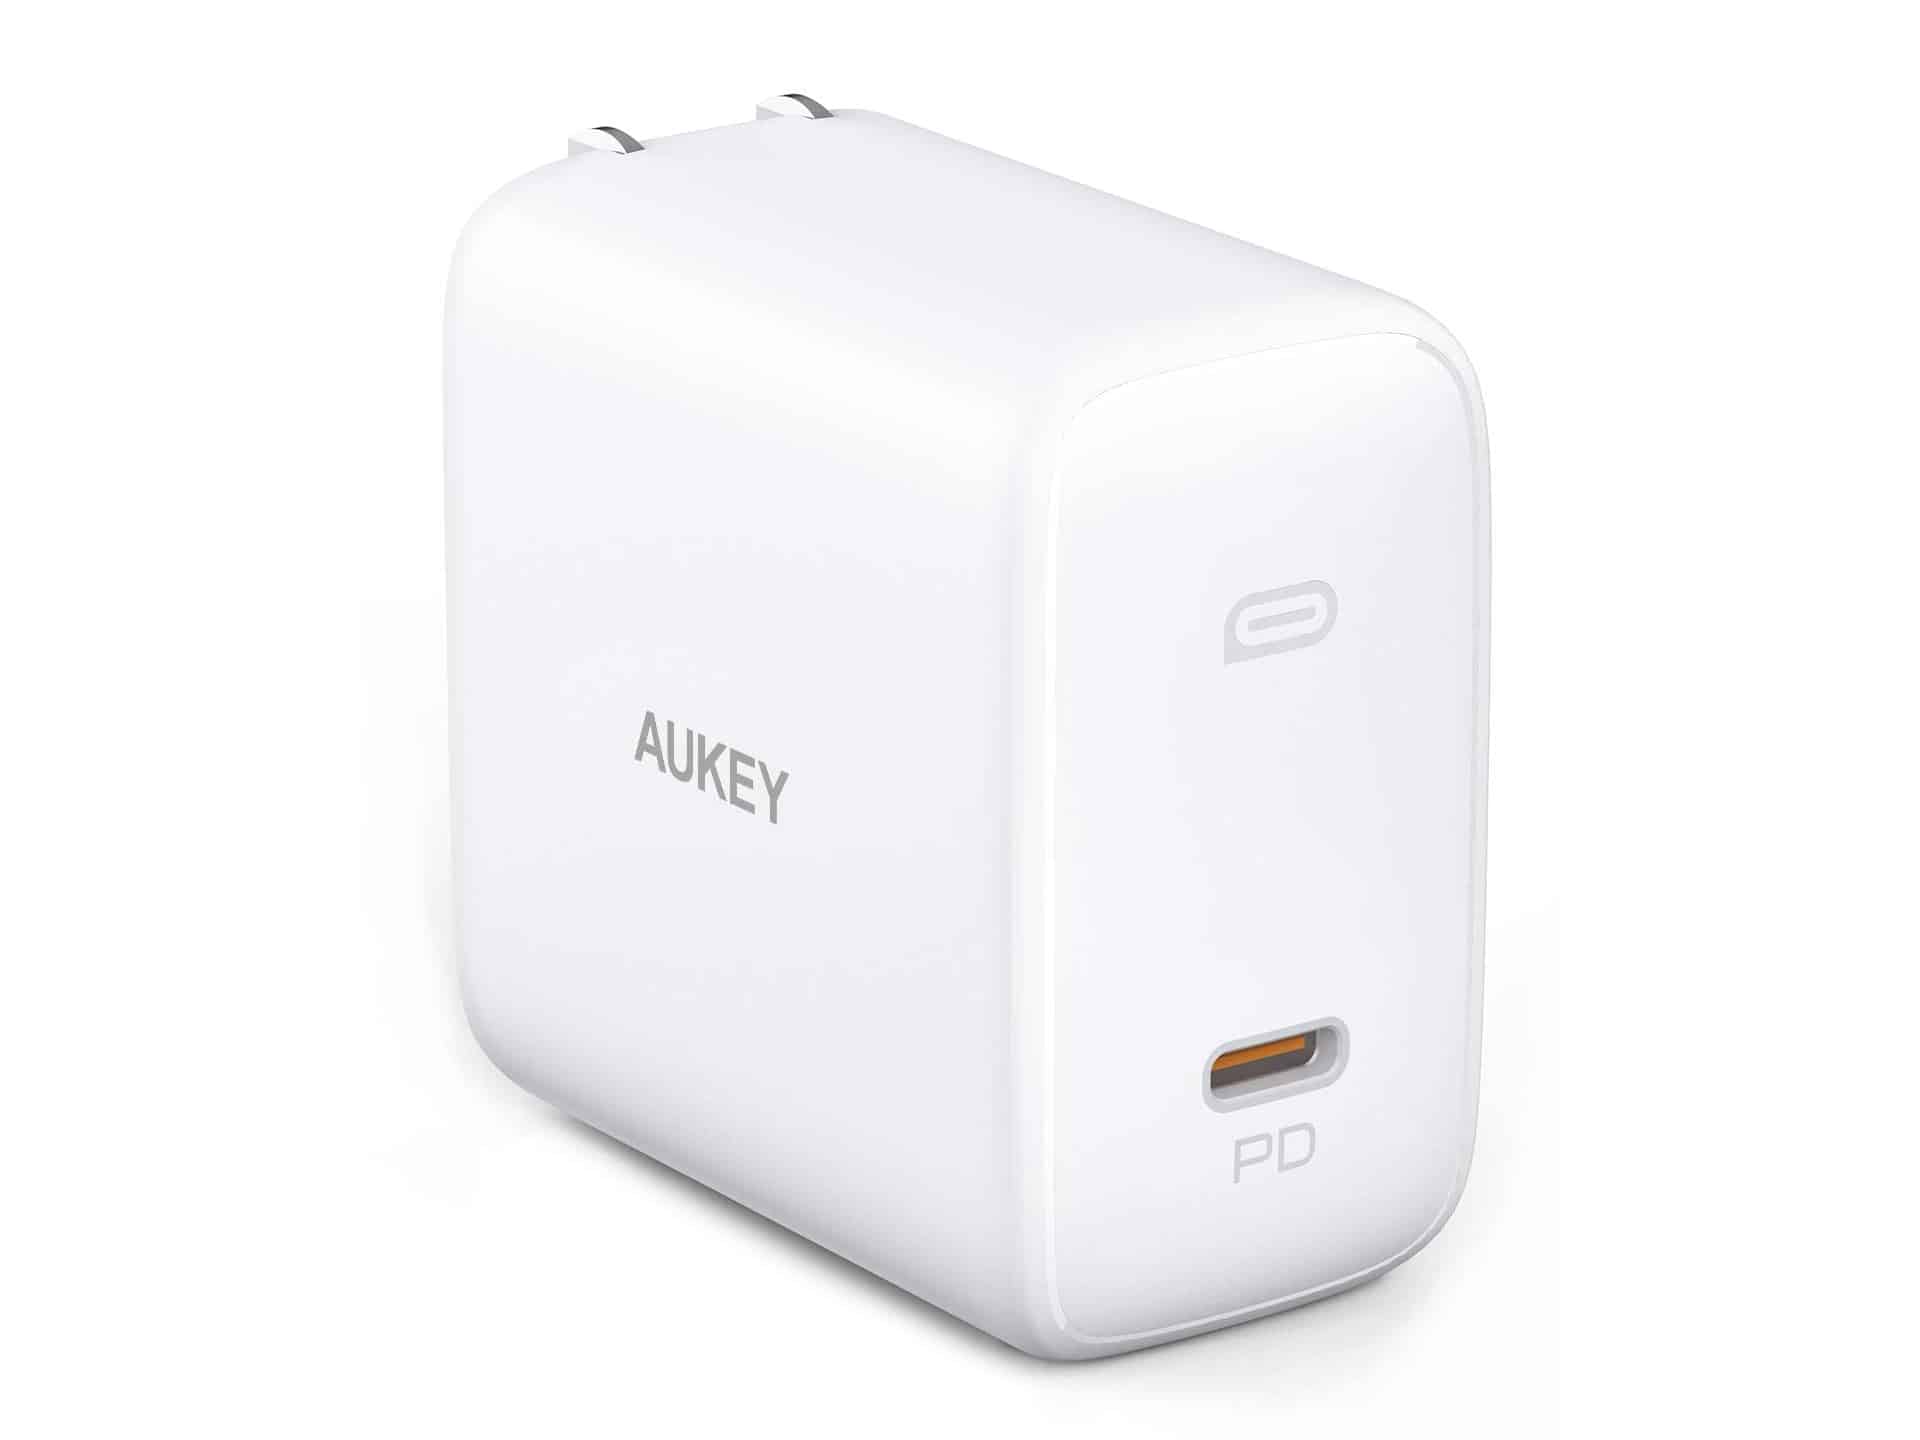 AUKEY Omnia USB C Charger